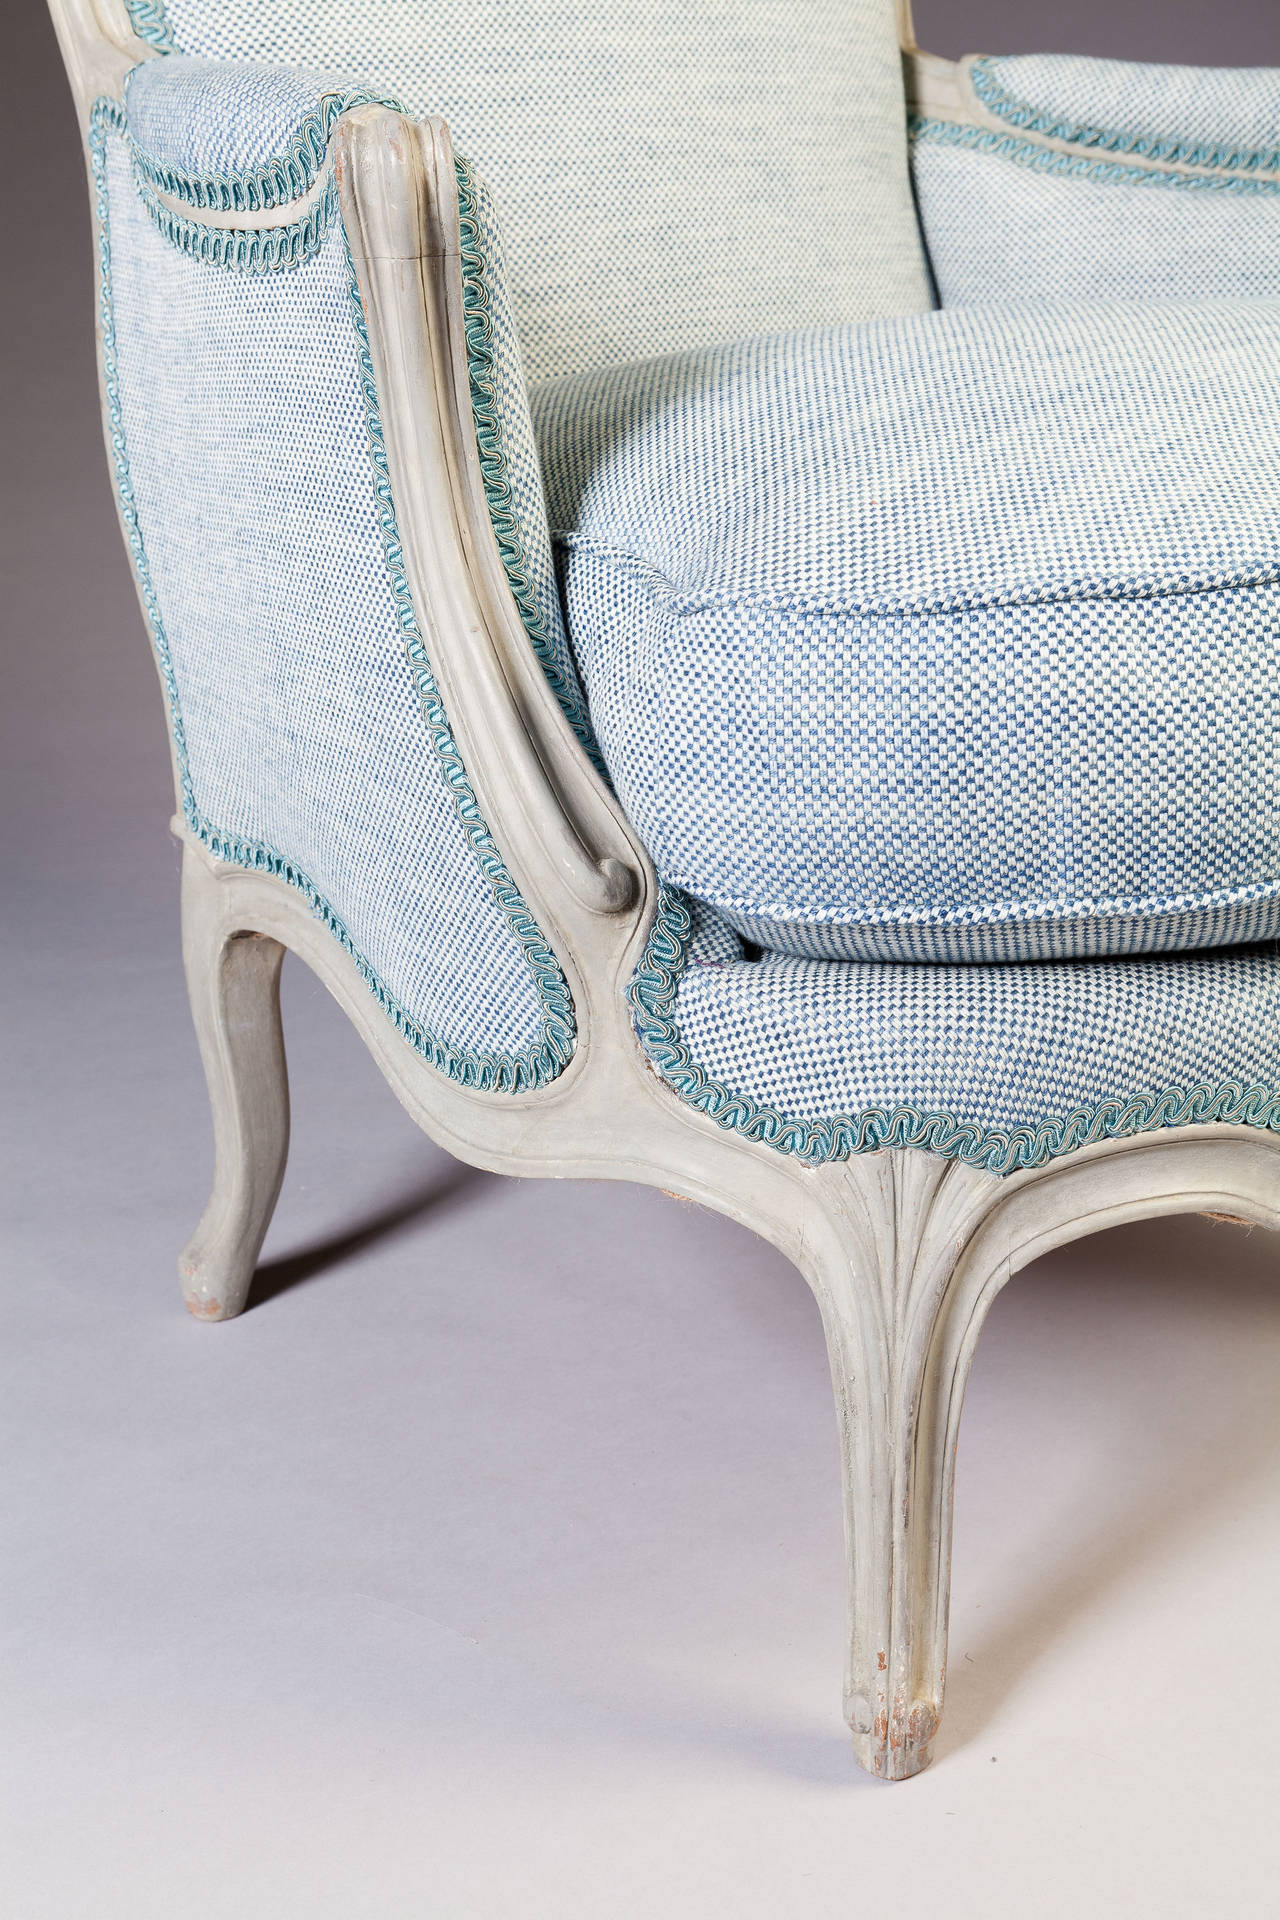 These fabulous bergeres are an unusually large and generous scale. The bergeres with reclined backs of simple outline with channeled detailing, outswept arms of Rococo inspiration raised on cabriole legs with neoclassical fluting.

Newly upholstered